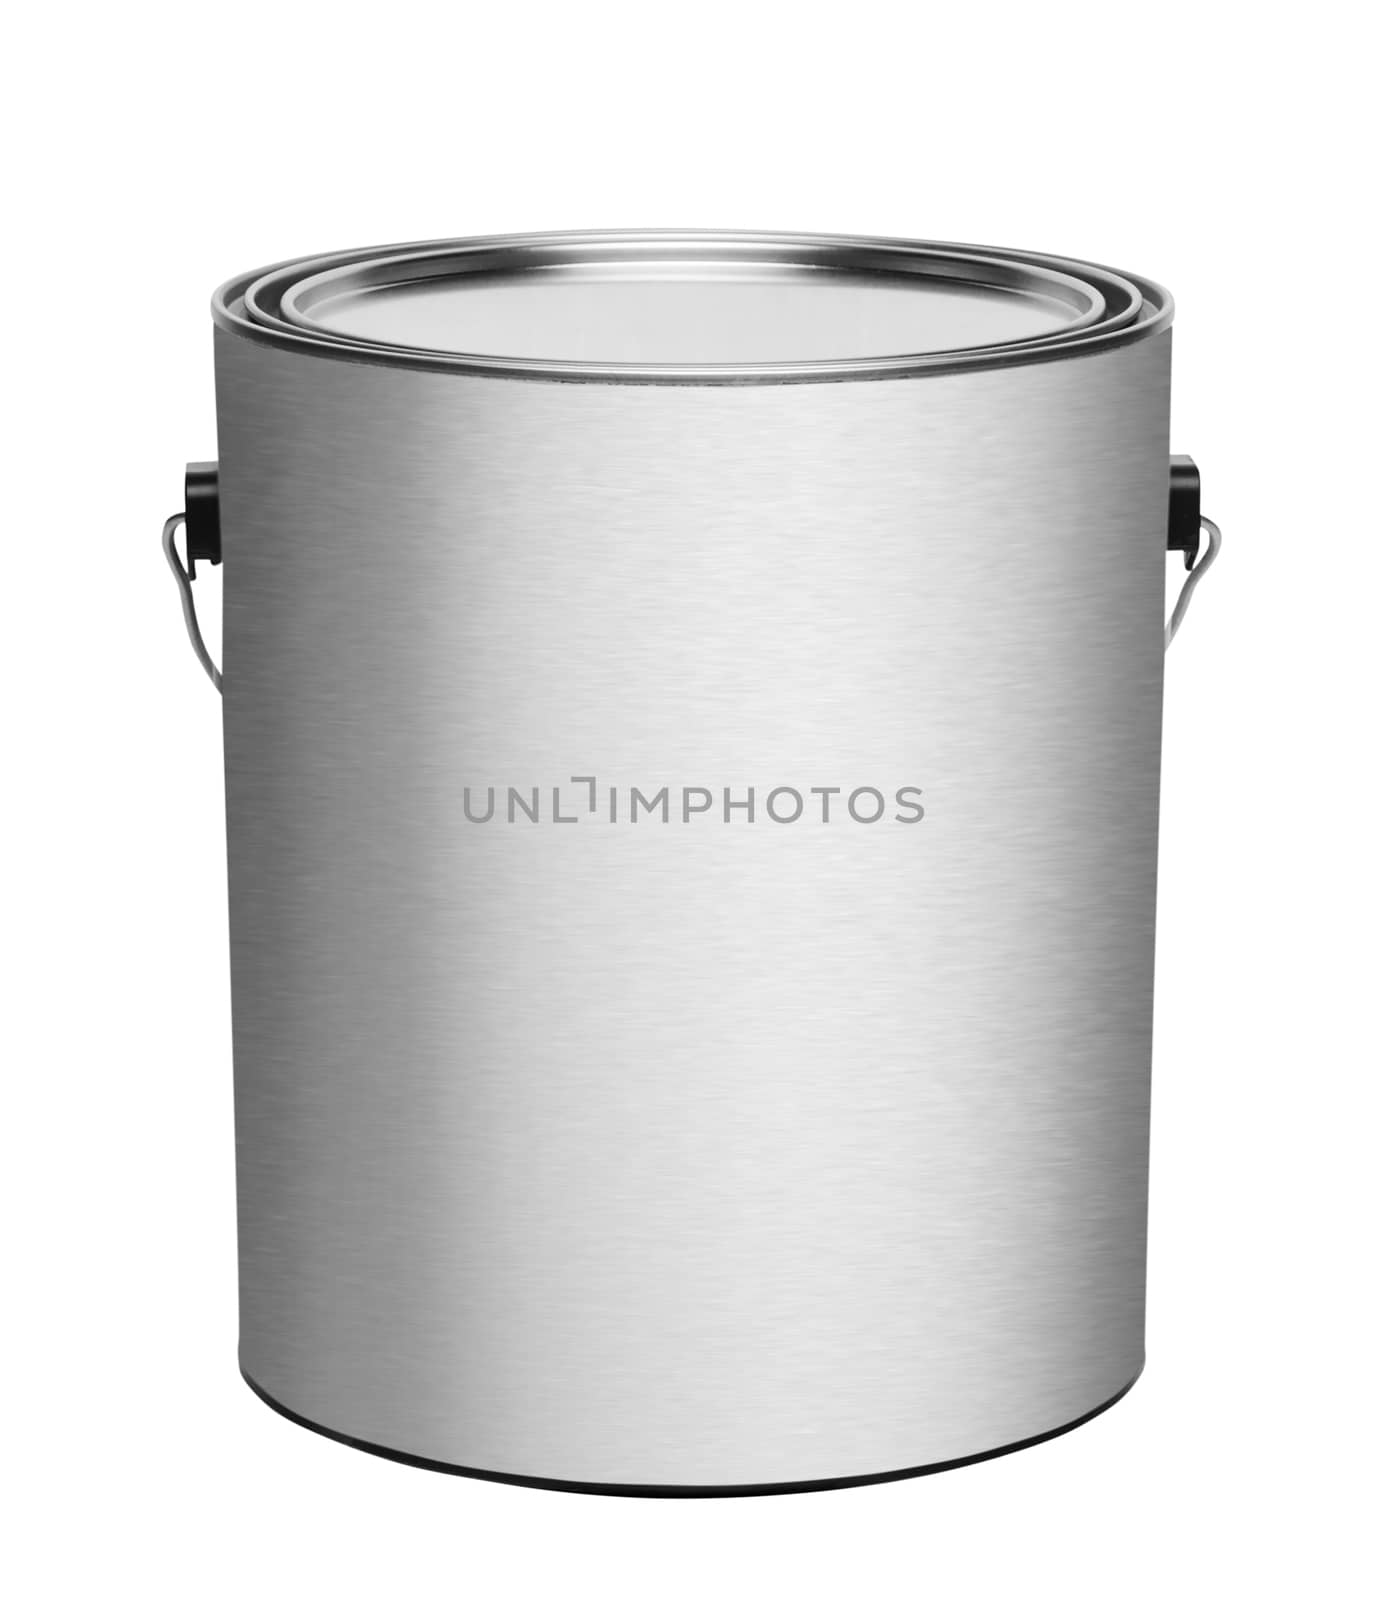 Metal gallon paint can with blank front for label and type, isolated with clipping path